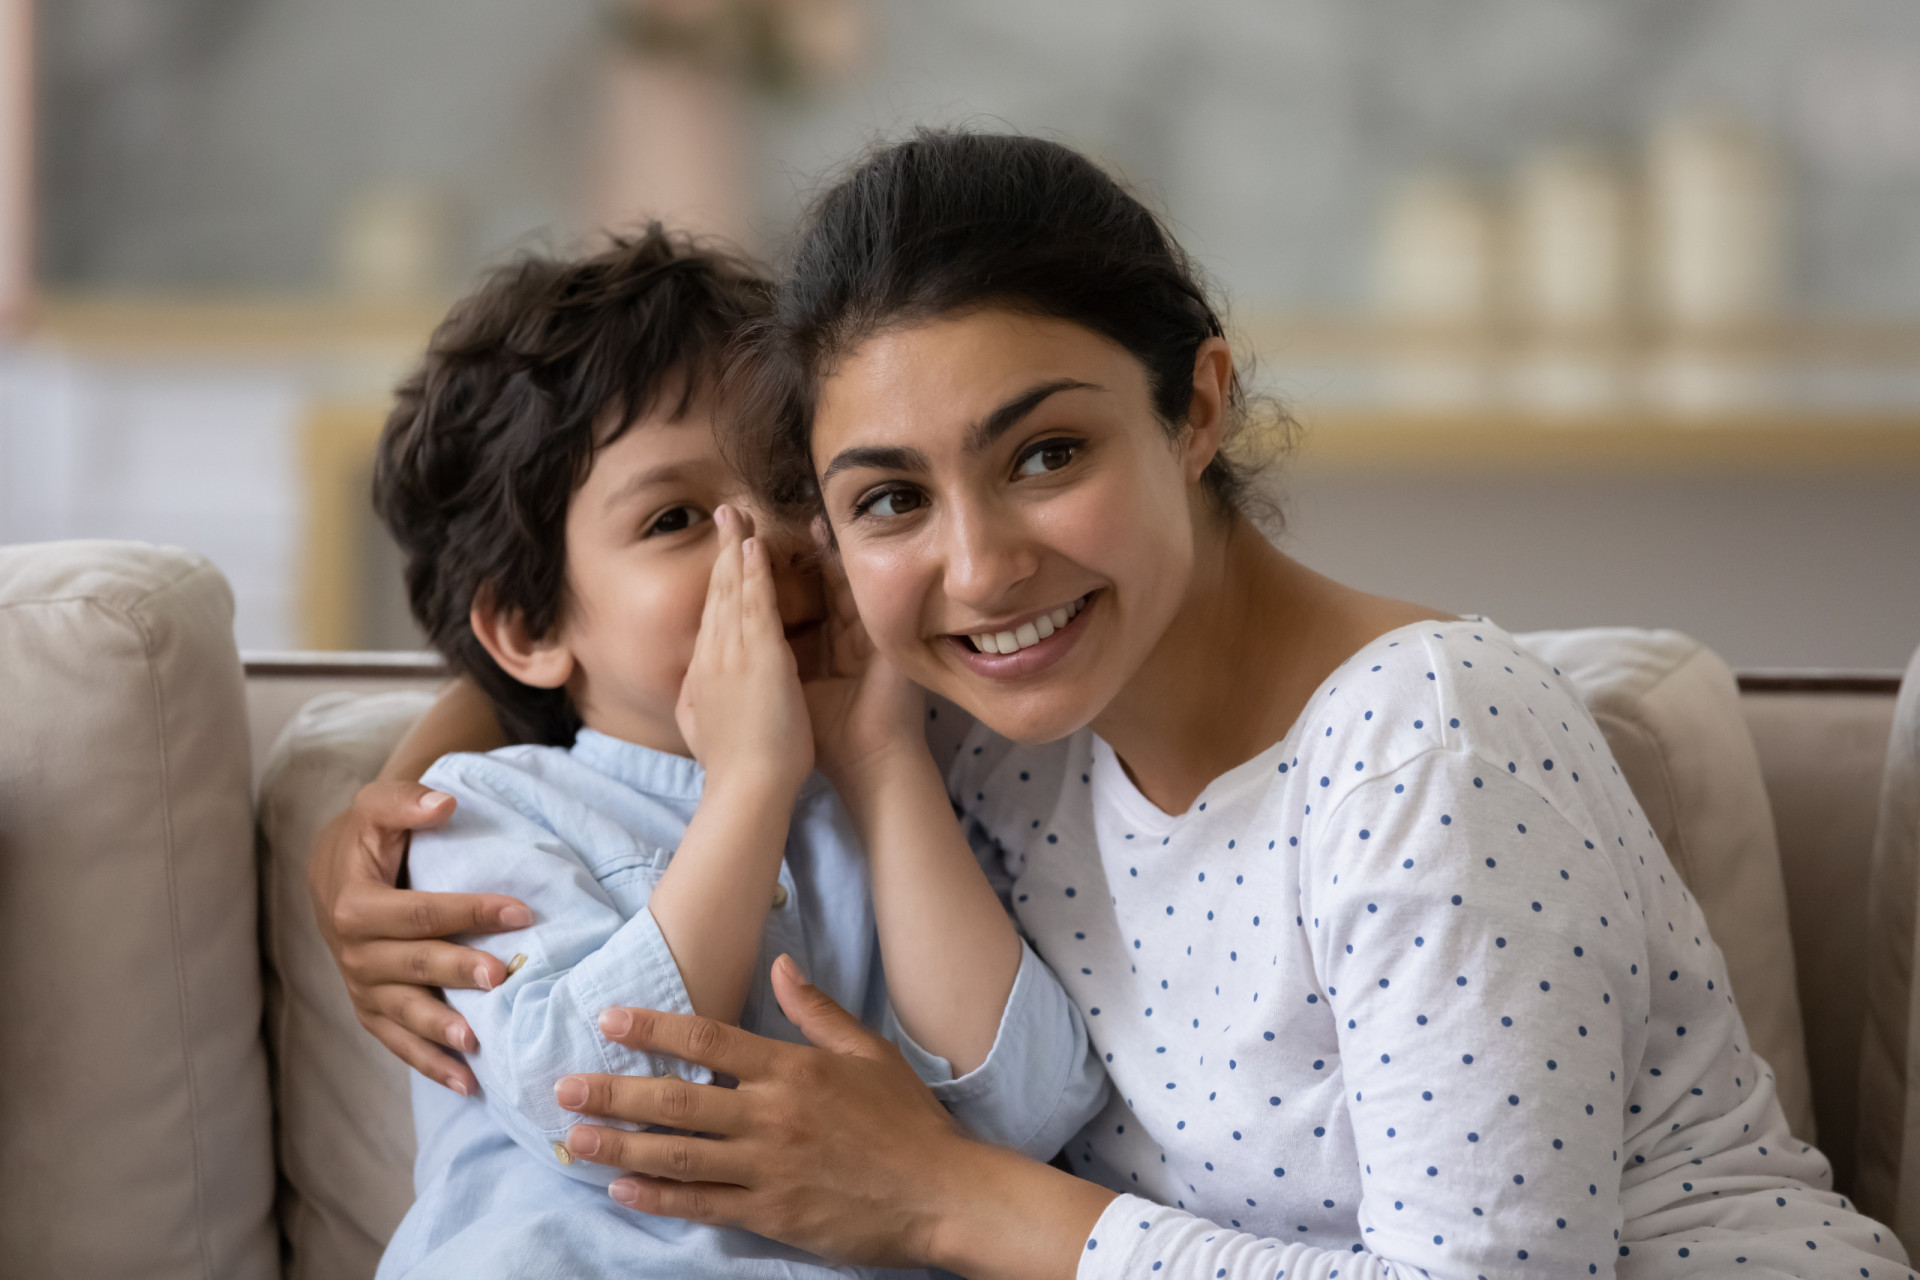 <p>Try activating your mother's intuition by listening to your children. Kids are wonderful sources of information on whether your decisions are working.</p><p><a href="https://www.msn.com/en-us/community/channel/vid-7xx8mnucu55yw63we9va2gwr7uihbxwc68fxqp25x6tg4ftibpra?cvid=94631541bc0f4f89bfd59158d696ad7e">Follow us and access great exclusive content every day</a></p>